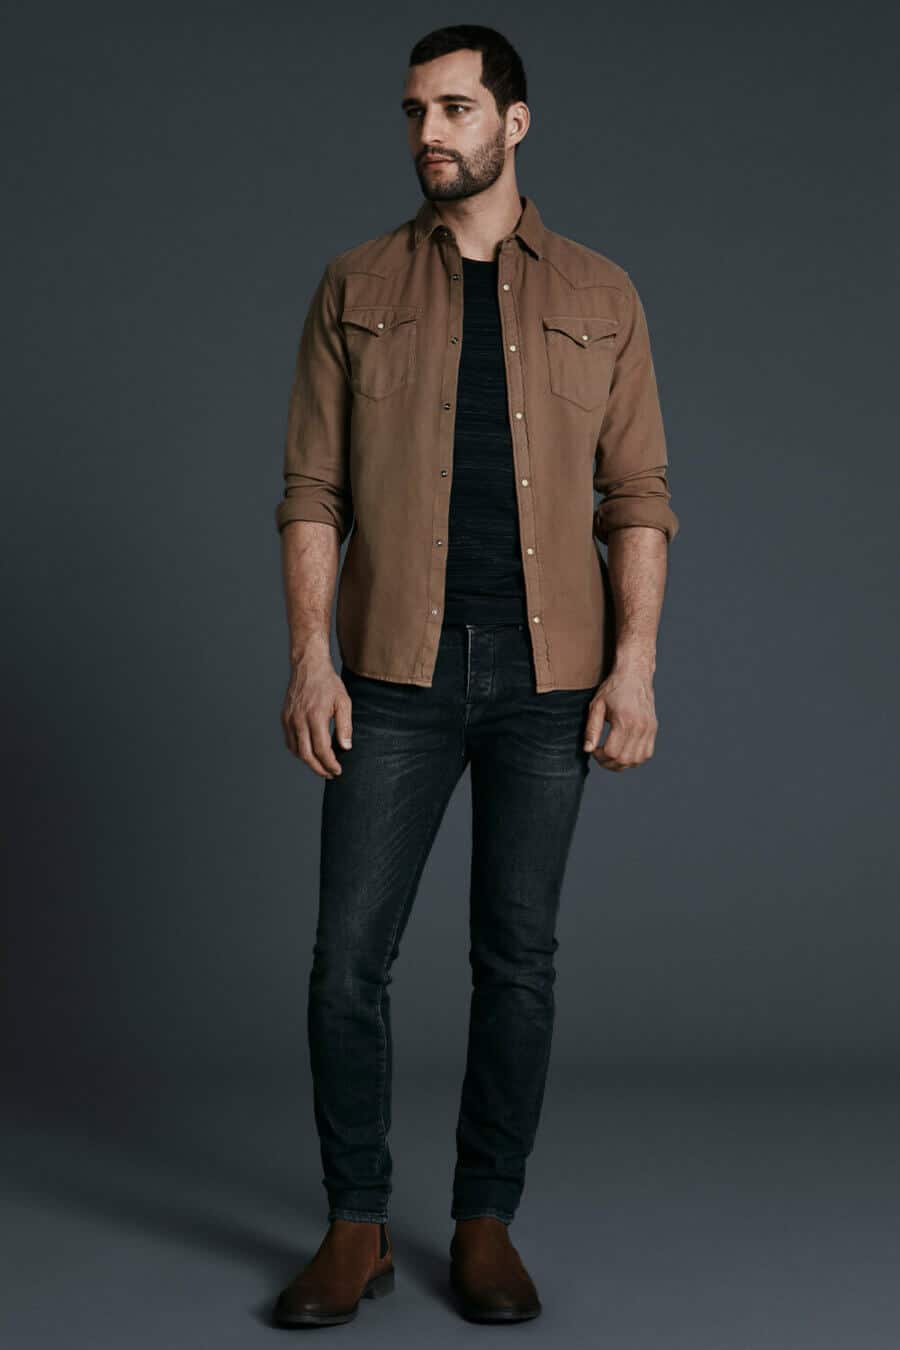 Men's workwear outfit with black jeans, brown overshirt and chelsea boots